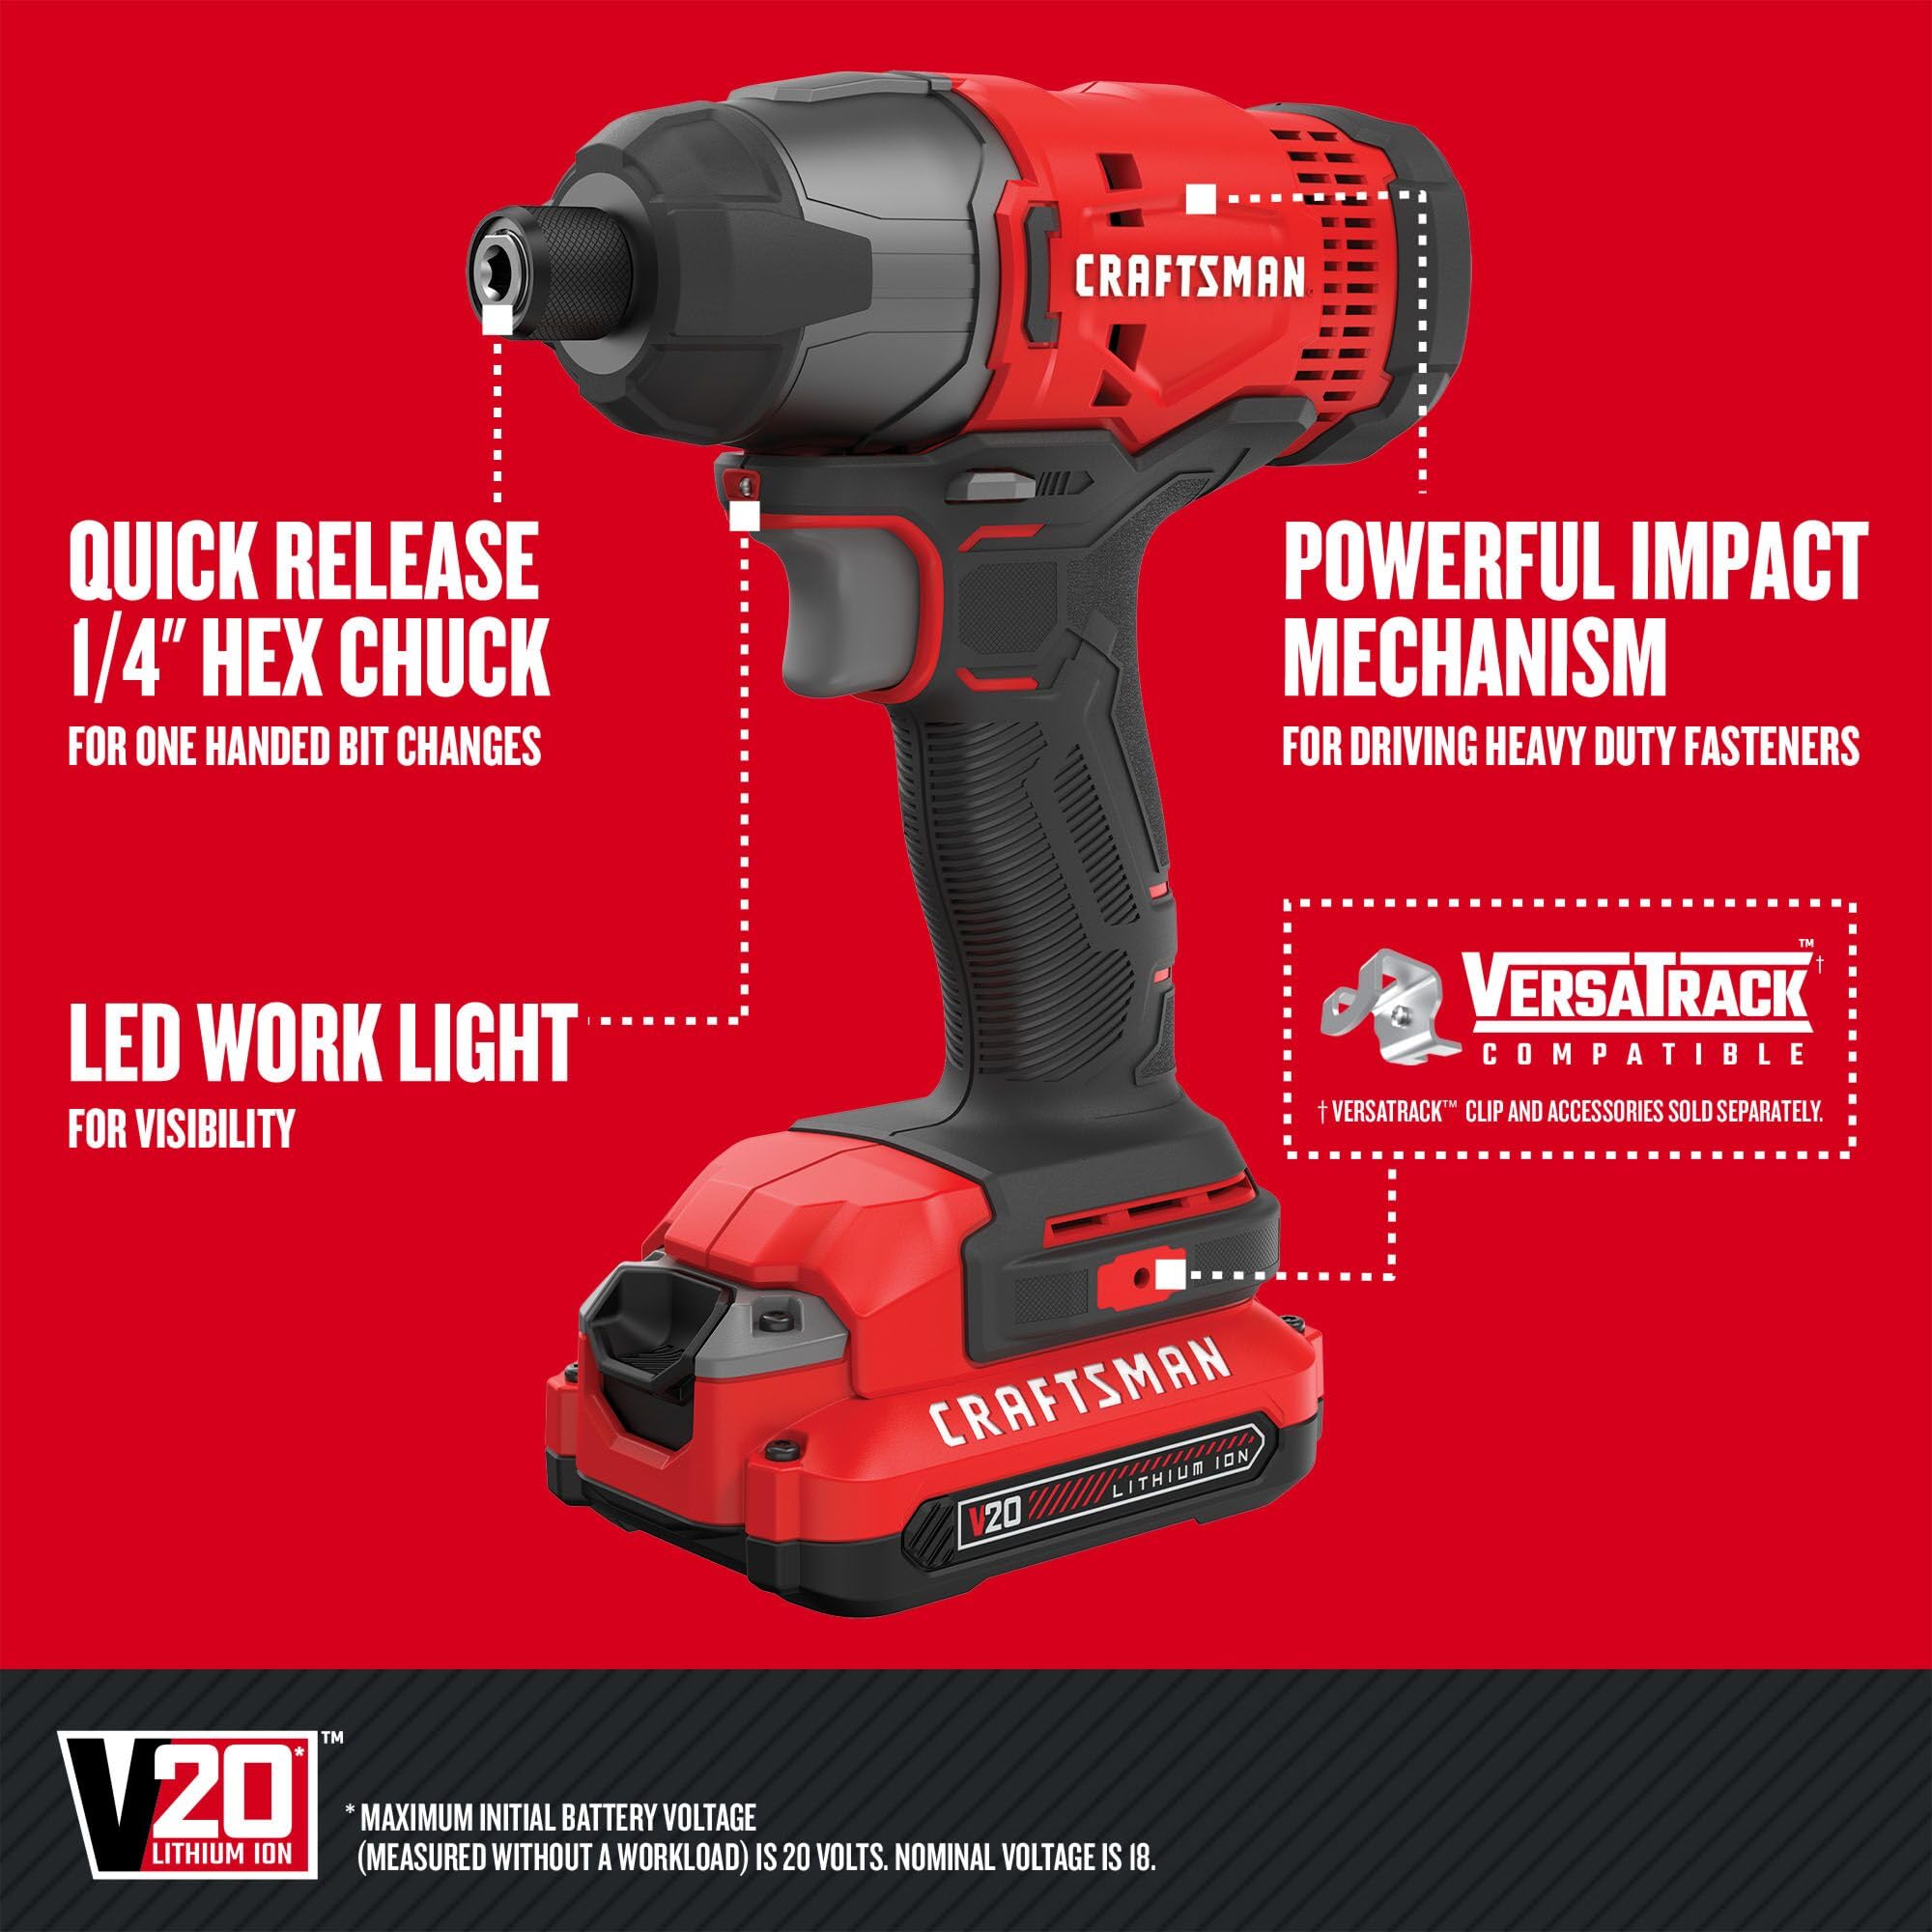 CRAFTSMAN V20 MAX Cordless Drill and Impact Driver, Power Tool Combo Kit with 2 Batteries and Charger (CMCK200C2AM),Black/Red